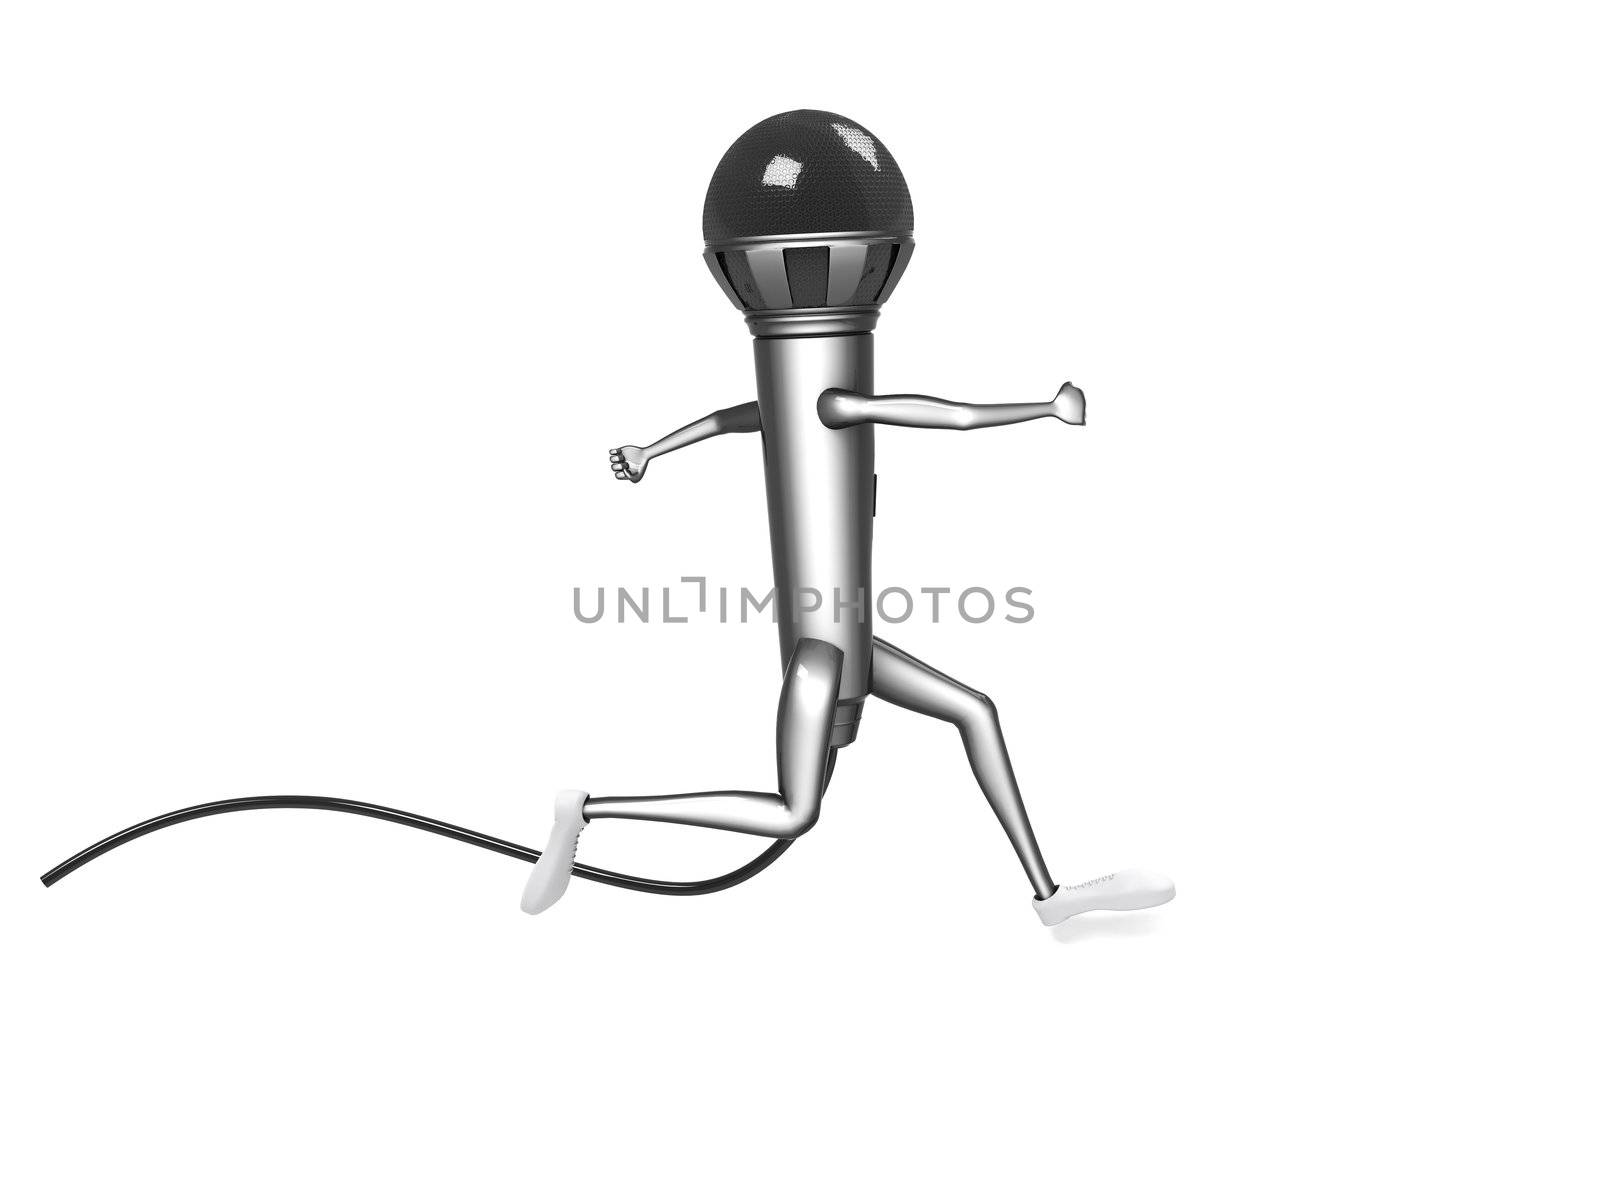 three dimensional running microphone with hands and legs  by imagerymajestic